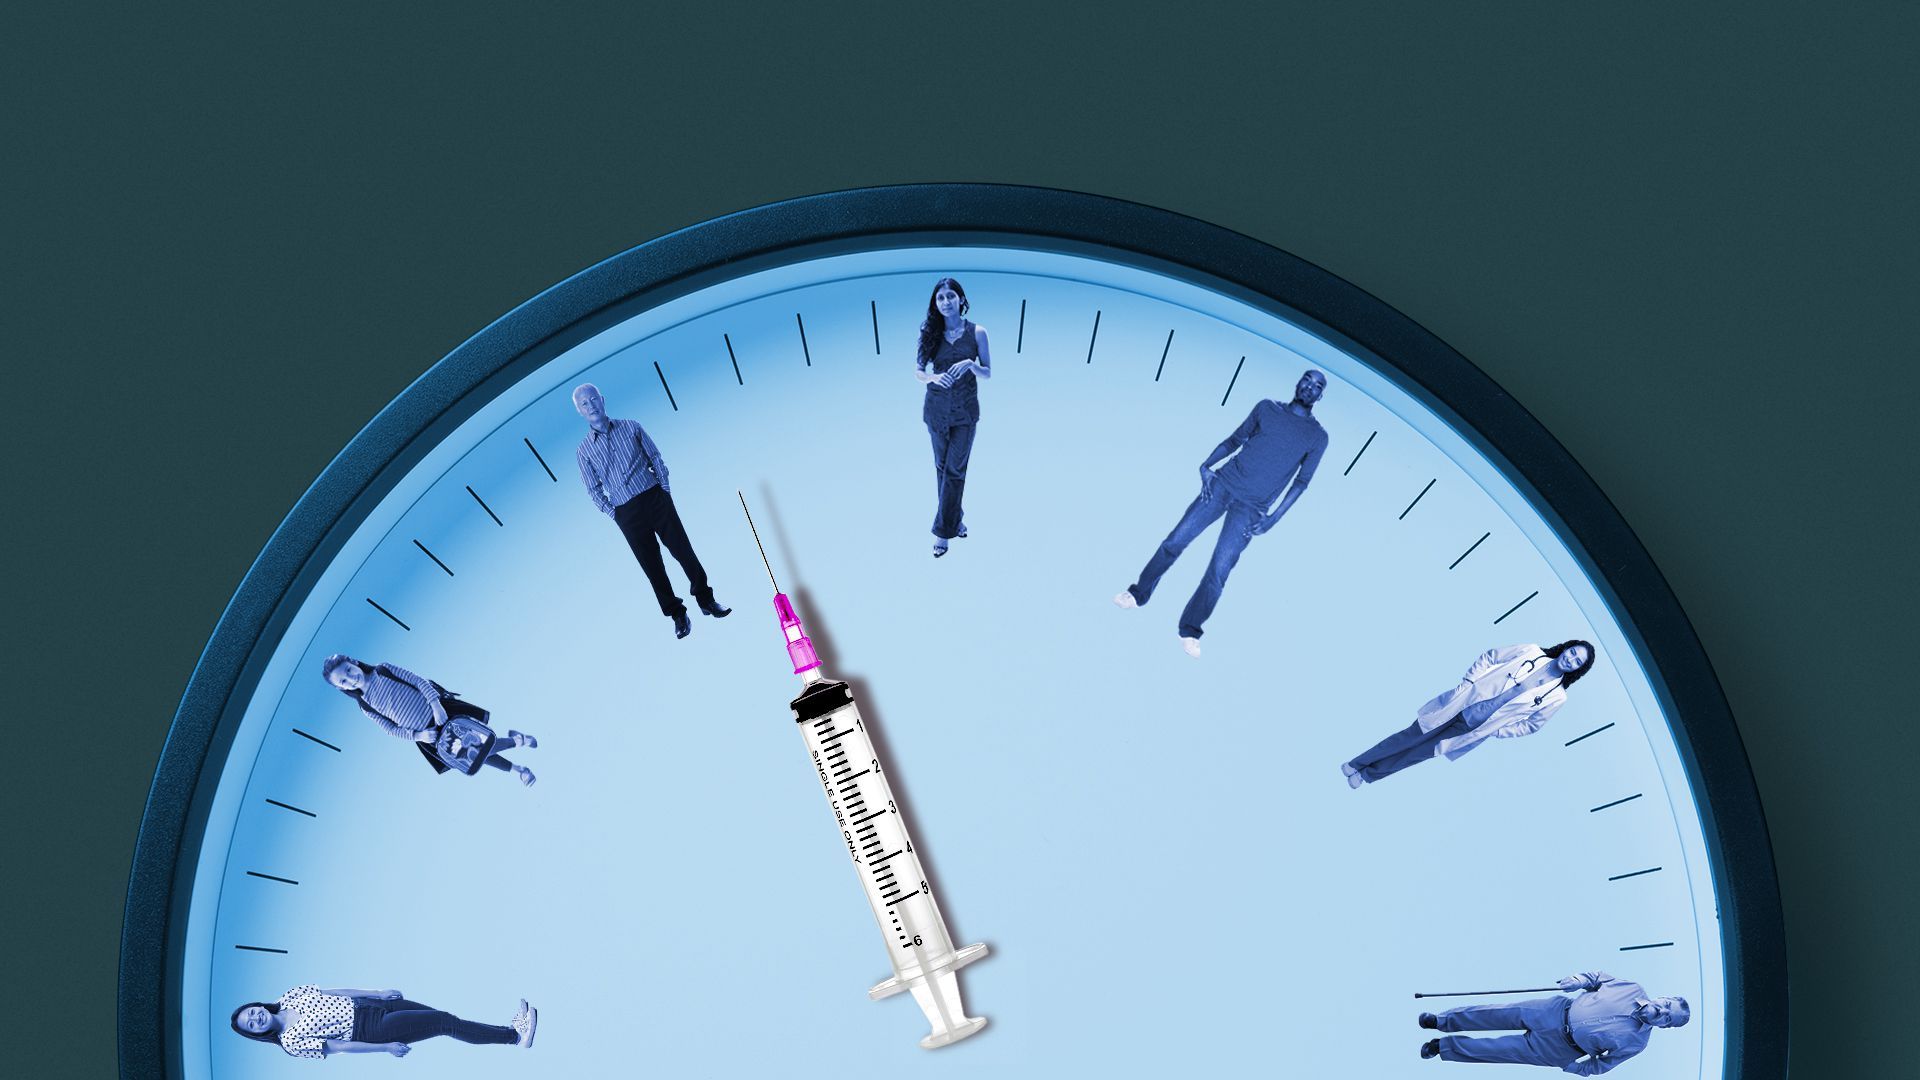 Illustration of a clock with a syringe hand pointing to people where the hours would be